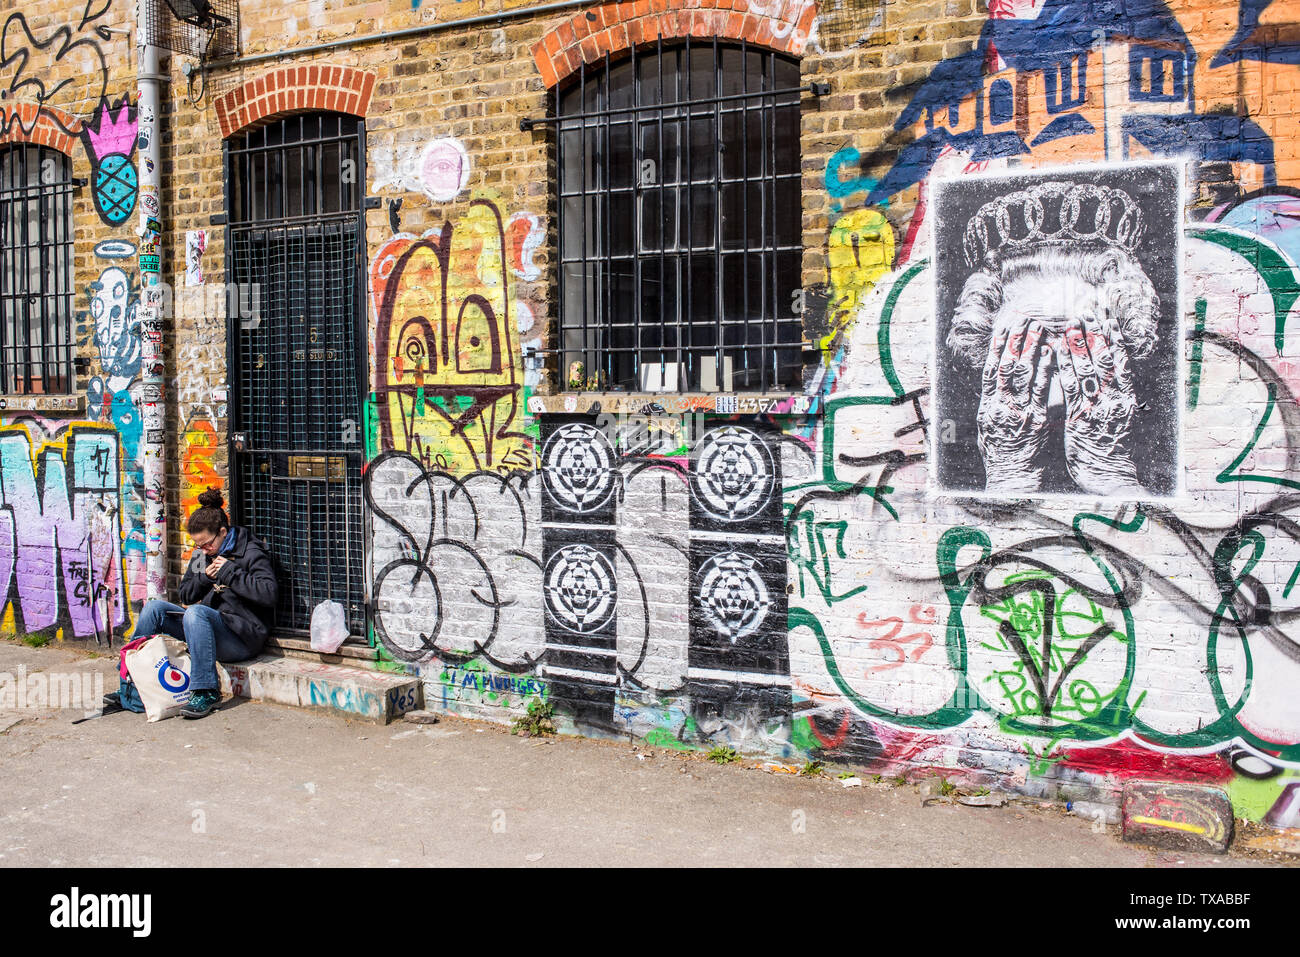 Woman sitting in front of graffiti in the famous Shoreditch Graffiti Wall at Seven Stars Yard, a yard filled with street art near Brick Lane Stock Photo